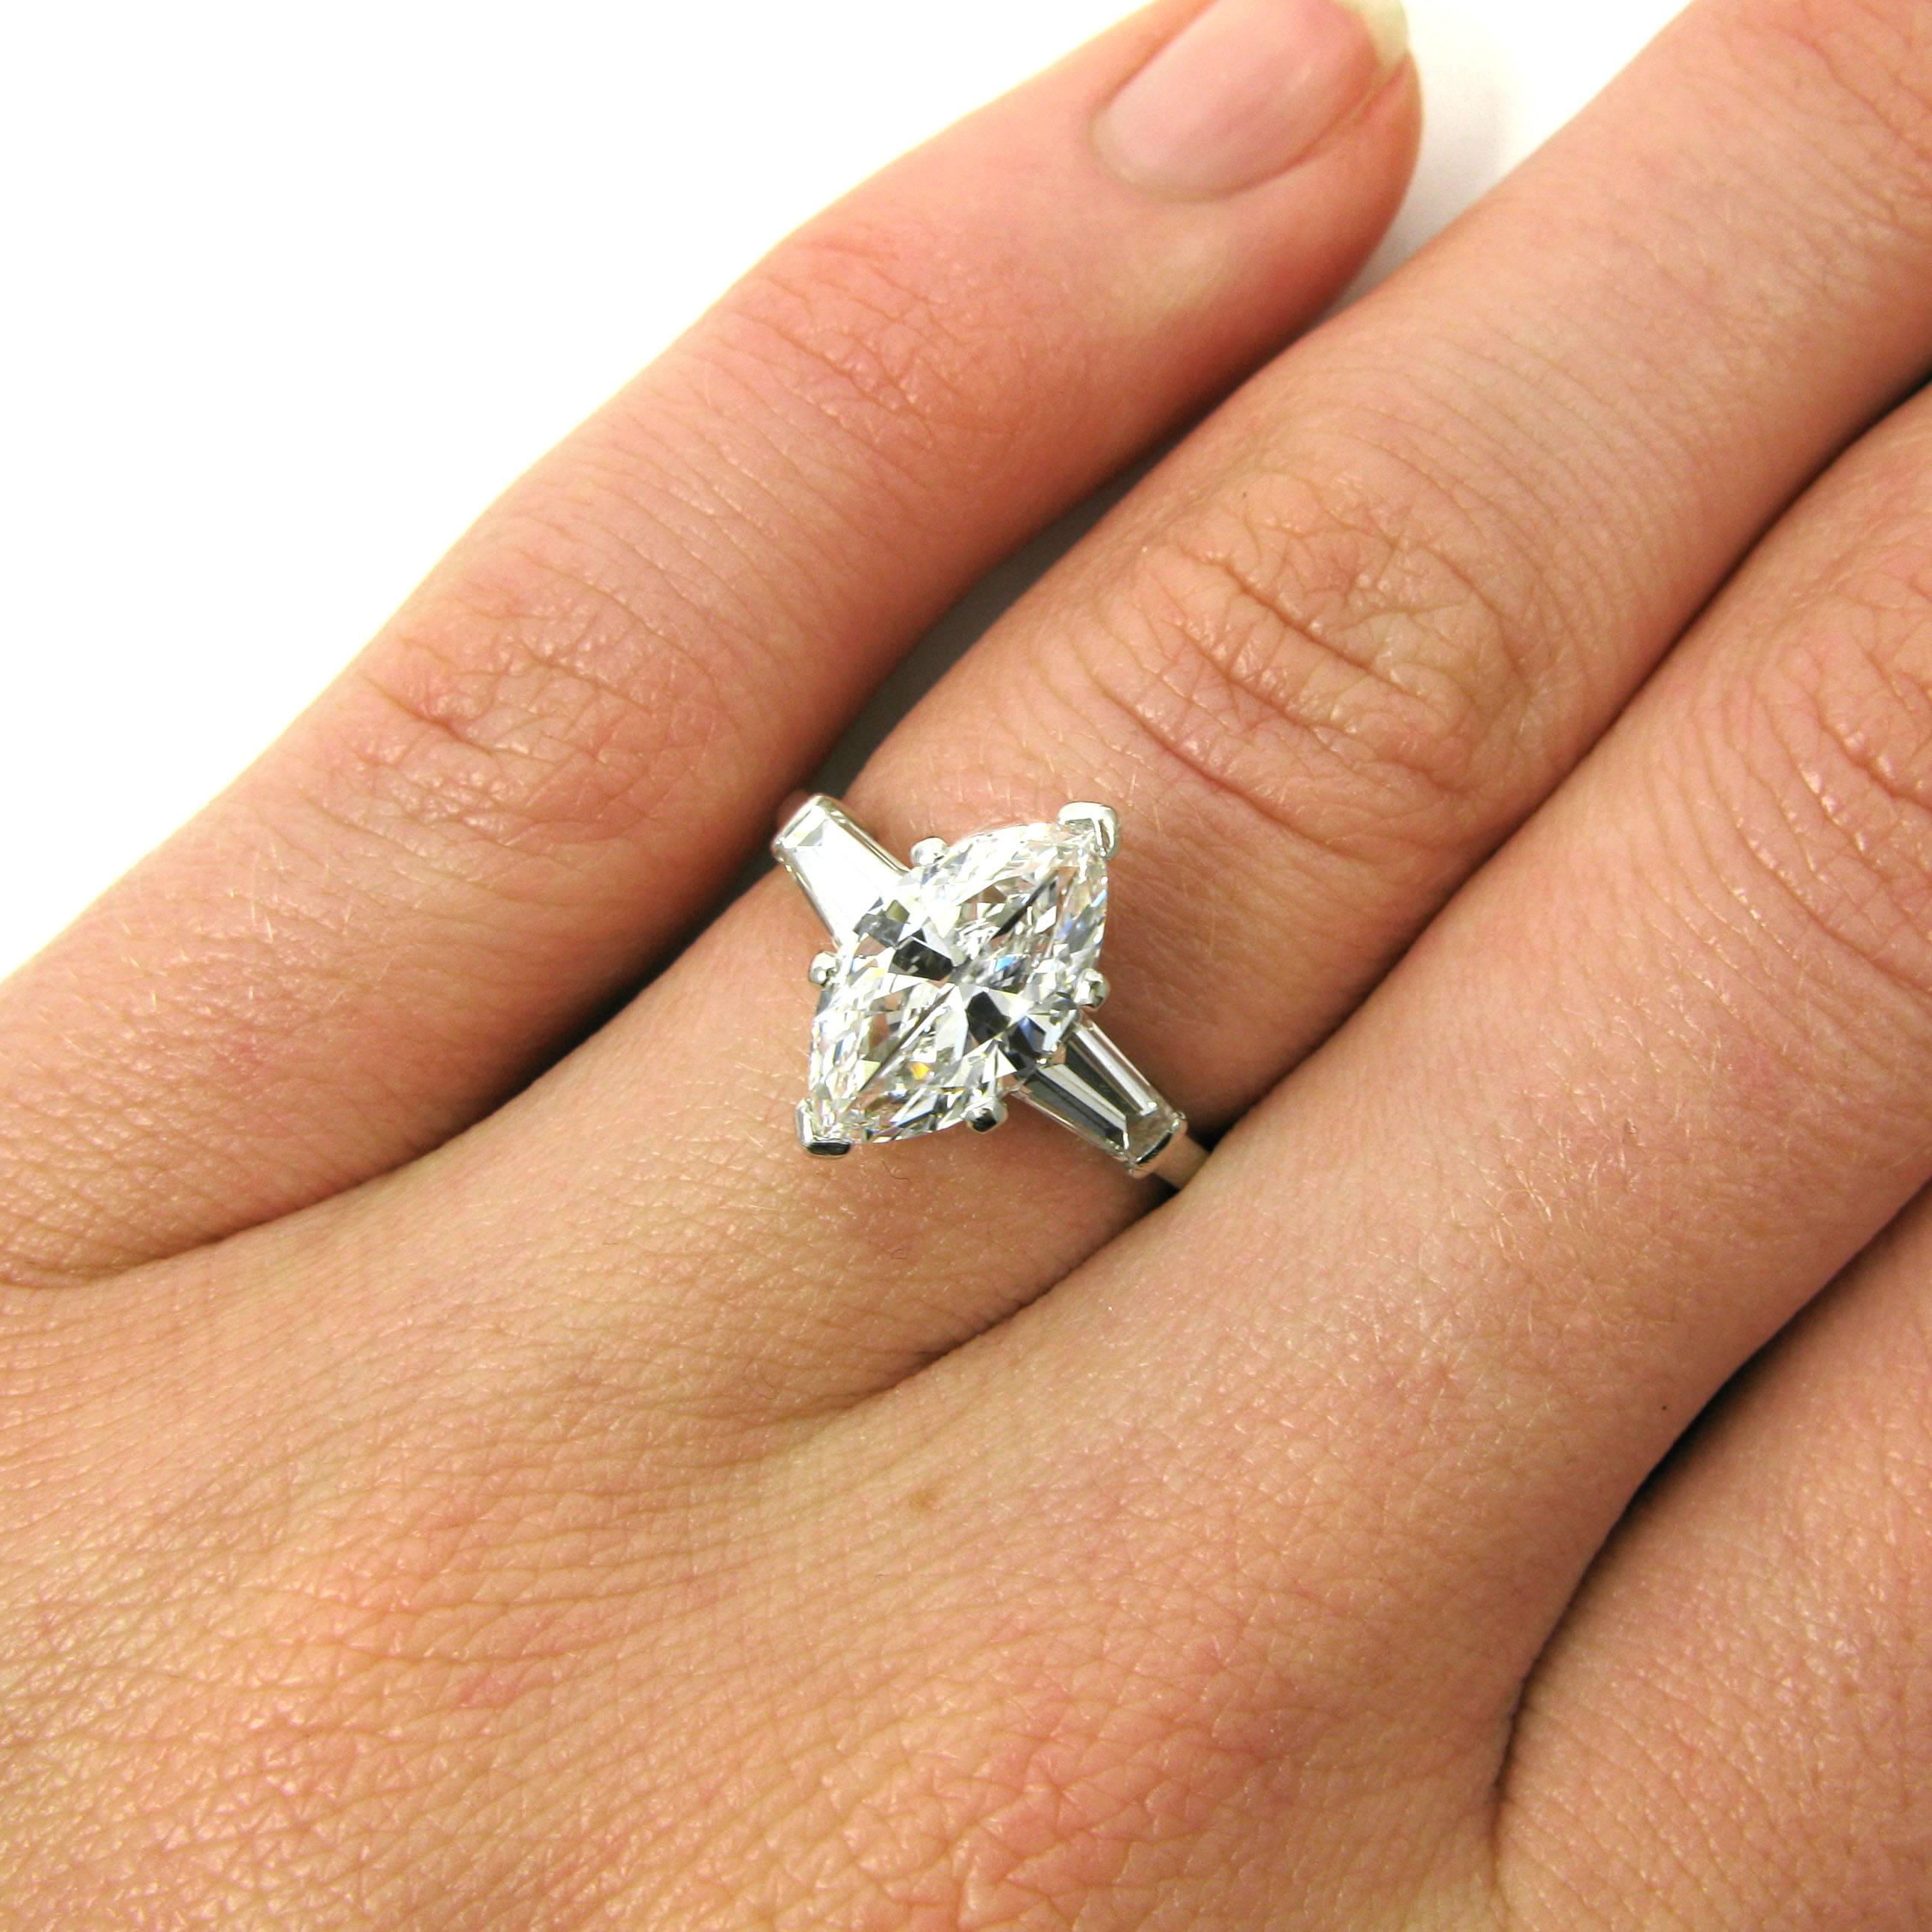 A lovely 1.75 carat D, Internally Flawless marquise-cut diamond prong-set in a classic signed VCA ring with two tapered baguette-cut side diamonds weighing approx. 0.30 carat total. Mounted in platinum. 

Purchase includes GIA Diamond Grading Report